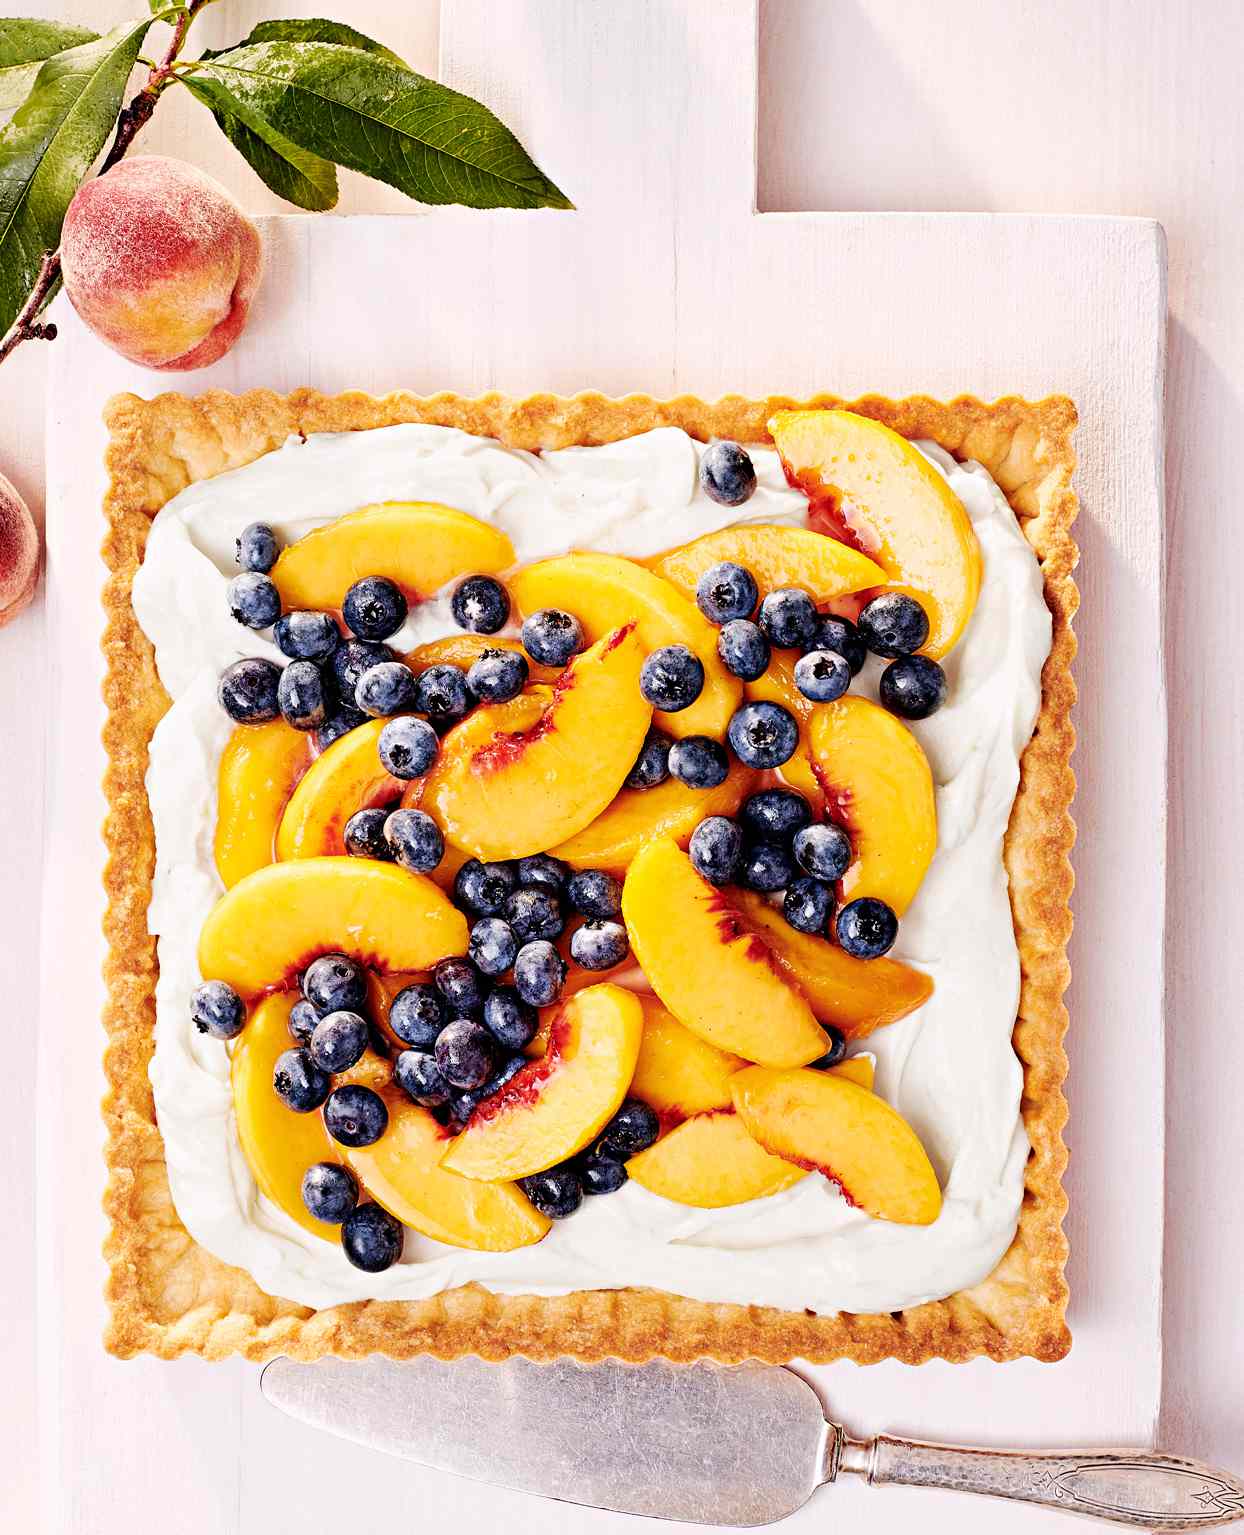 peach and blueberry tart with cream cheese filling